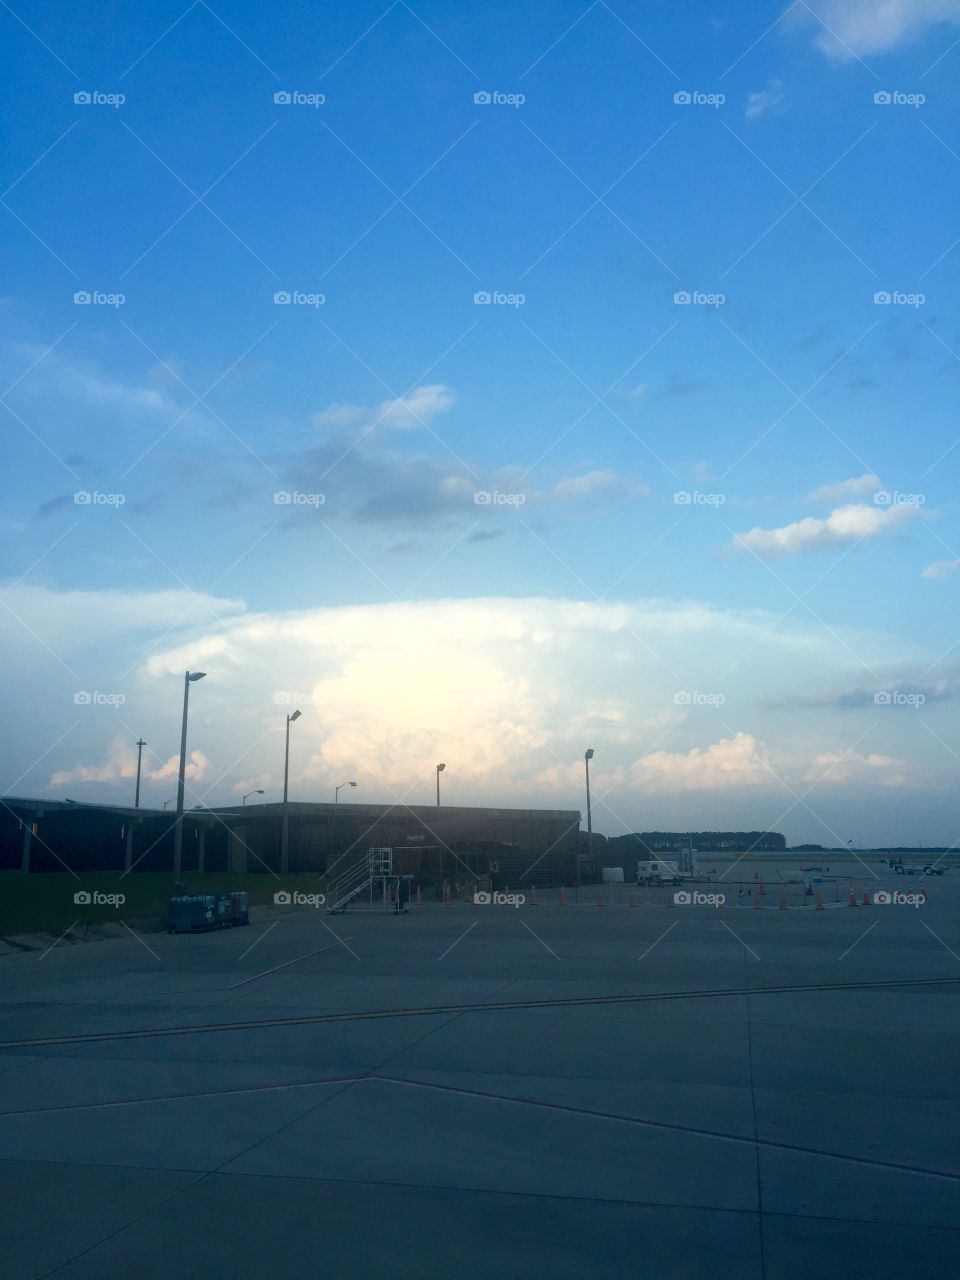 Thunderstorms in the distance